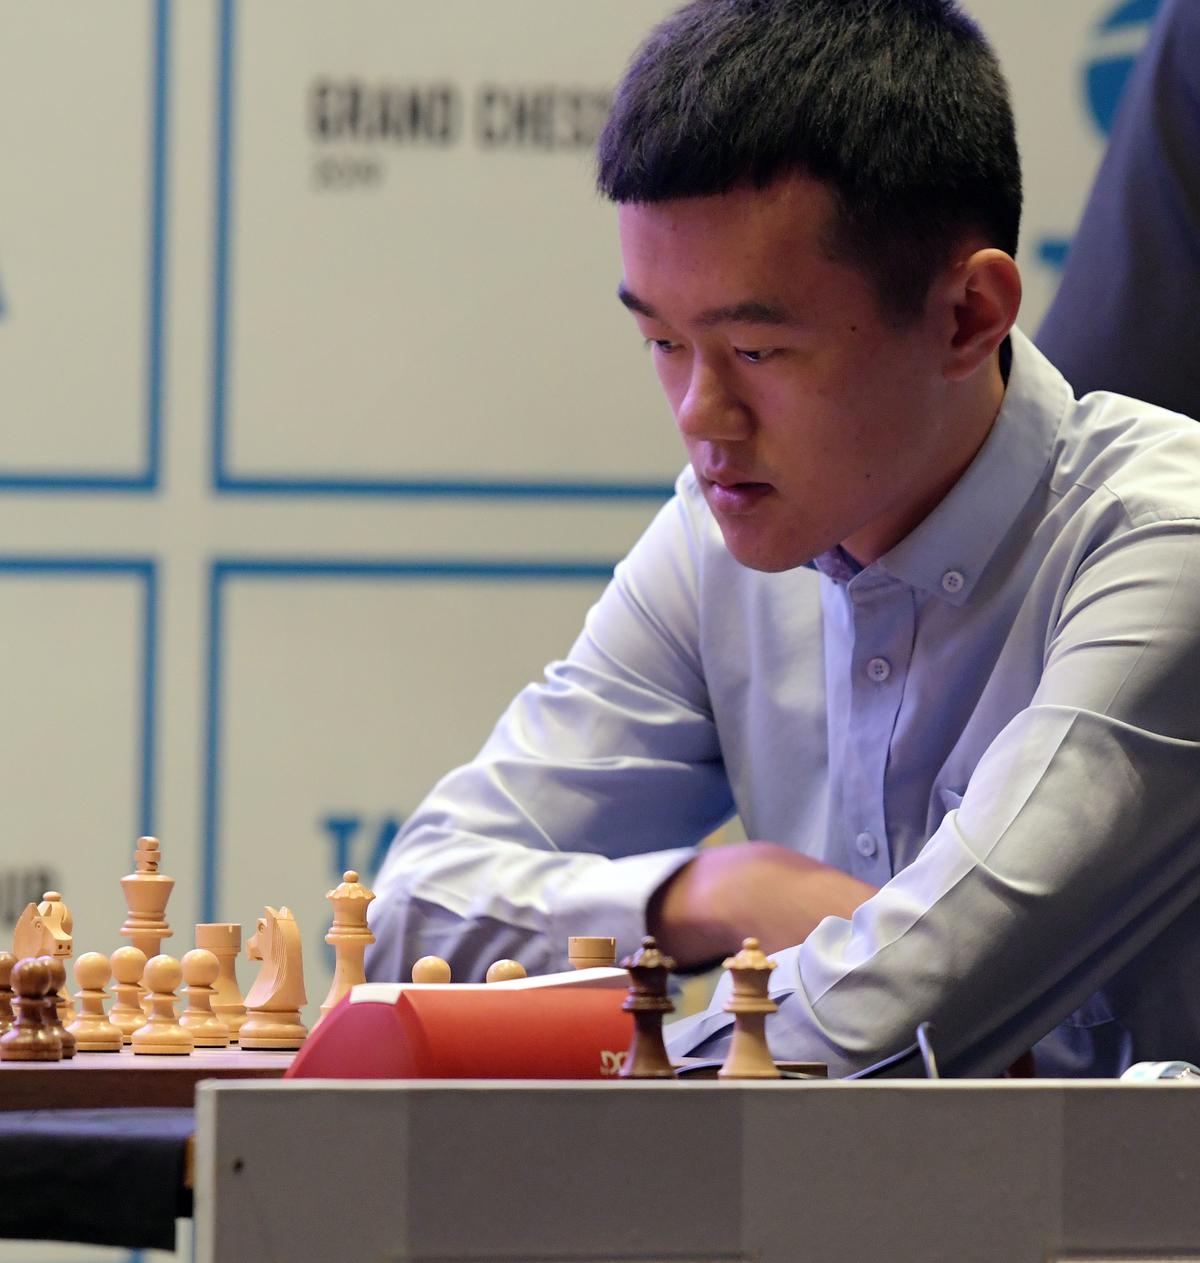 Momentous opportunity: If he finds a way past Nepomniachtchi, Ding Liren will make history and become the first male chess World champion from China. Photo credit: Rajeev Bhatt